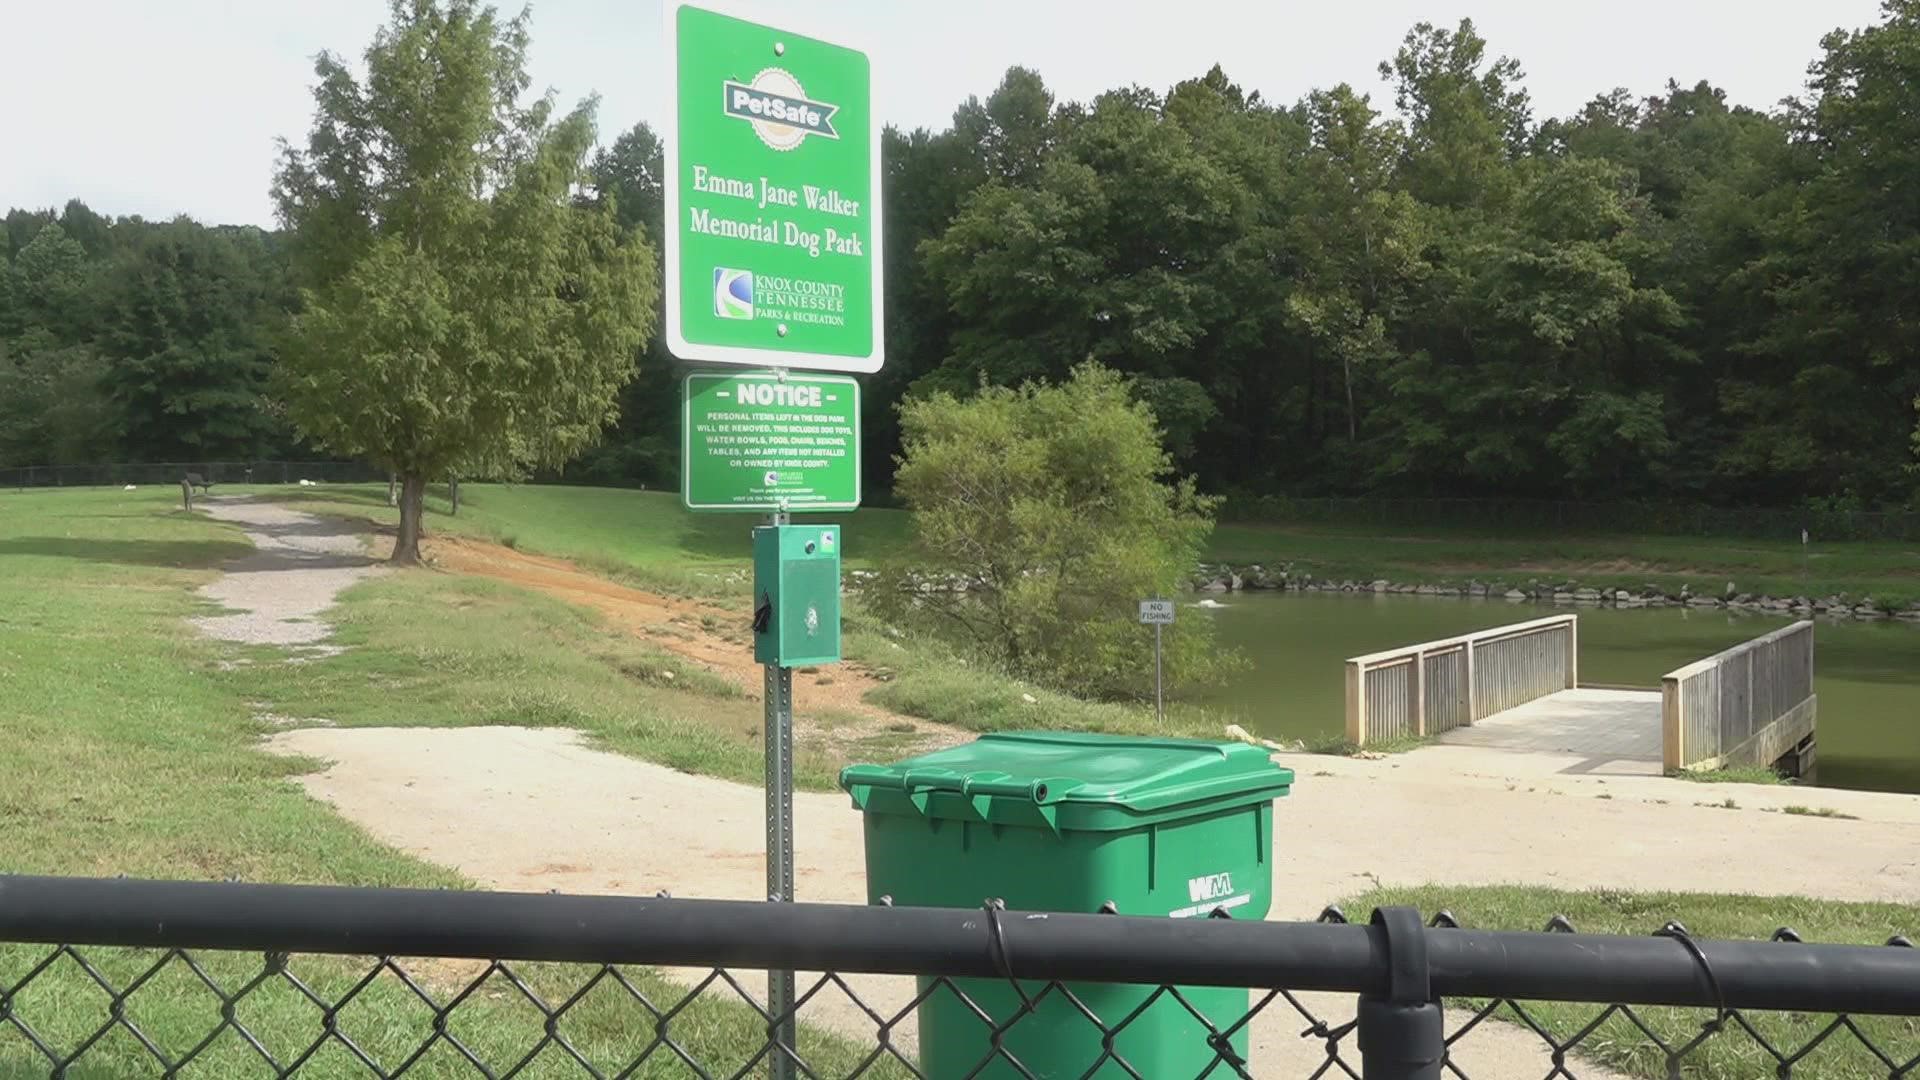 County leaders said they collected a sample of water at the pond after noticing discoloration to be tested for algae.